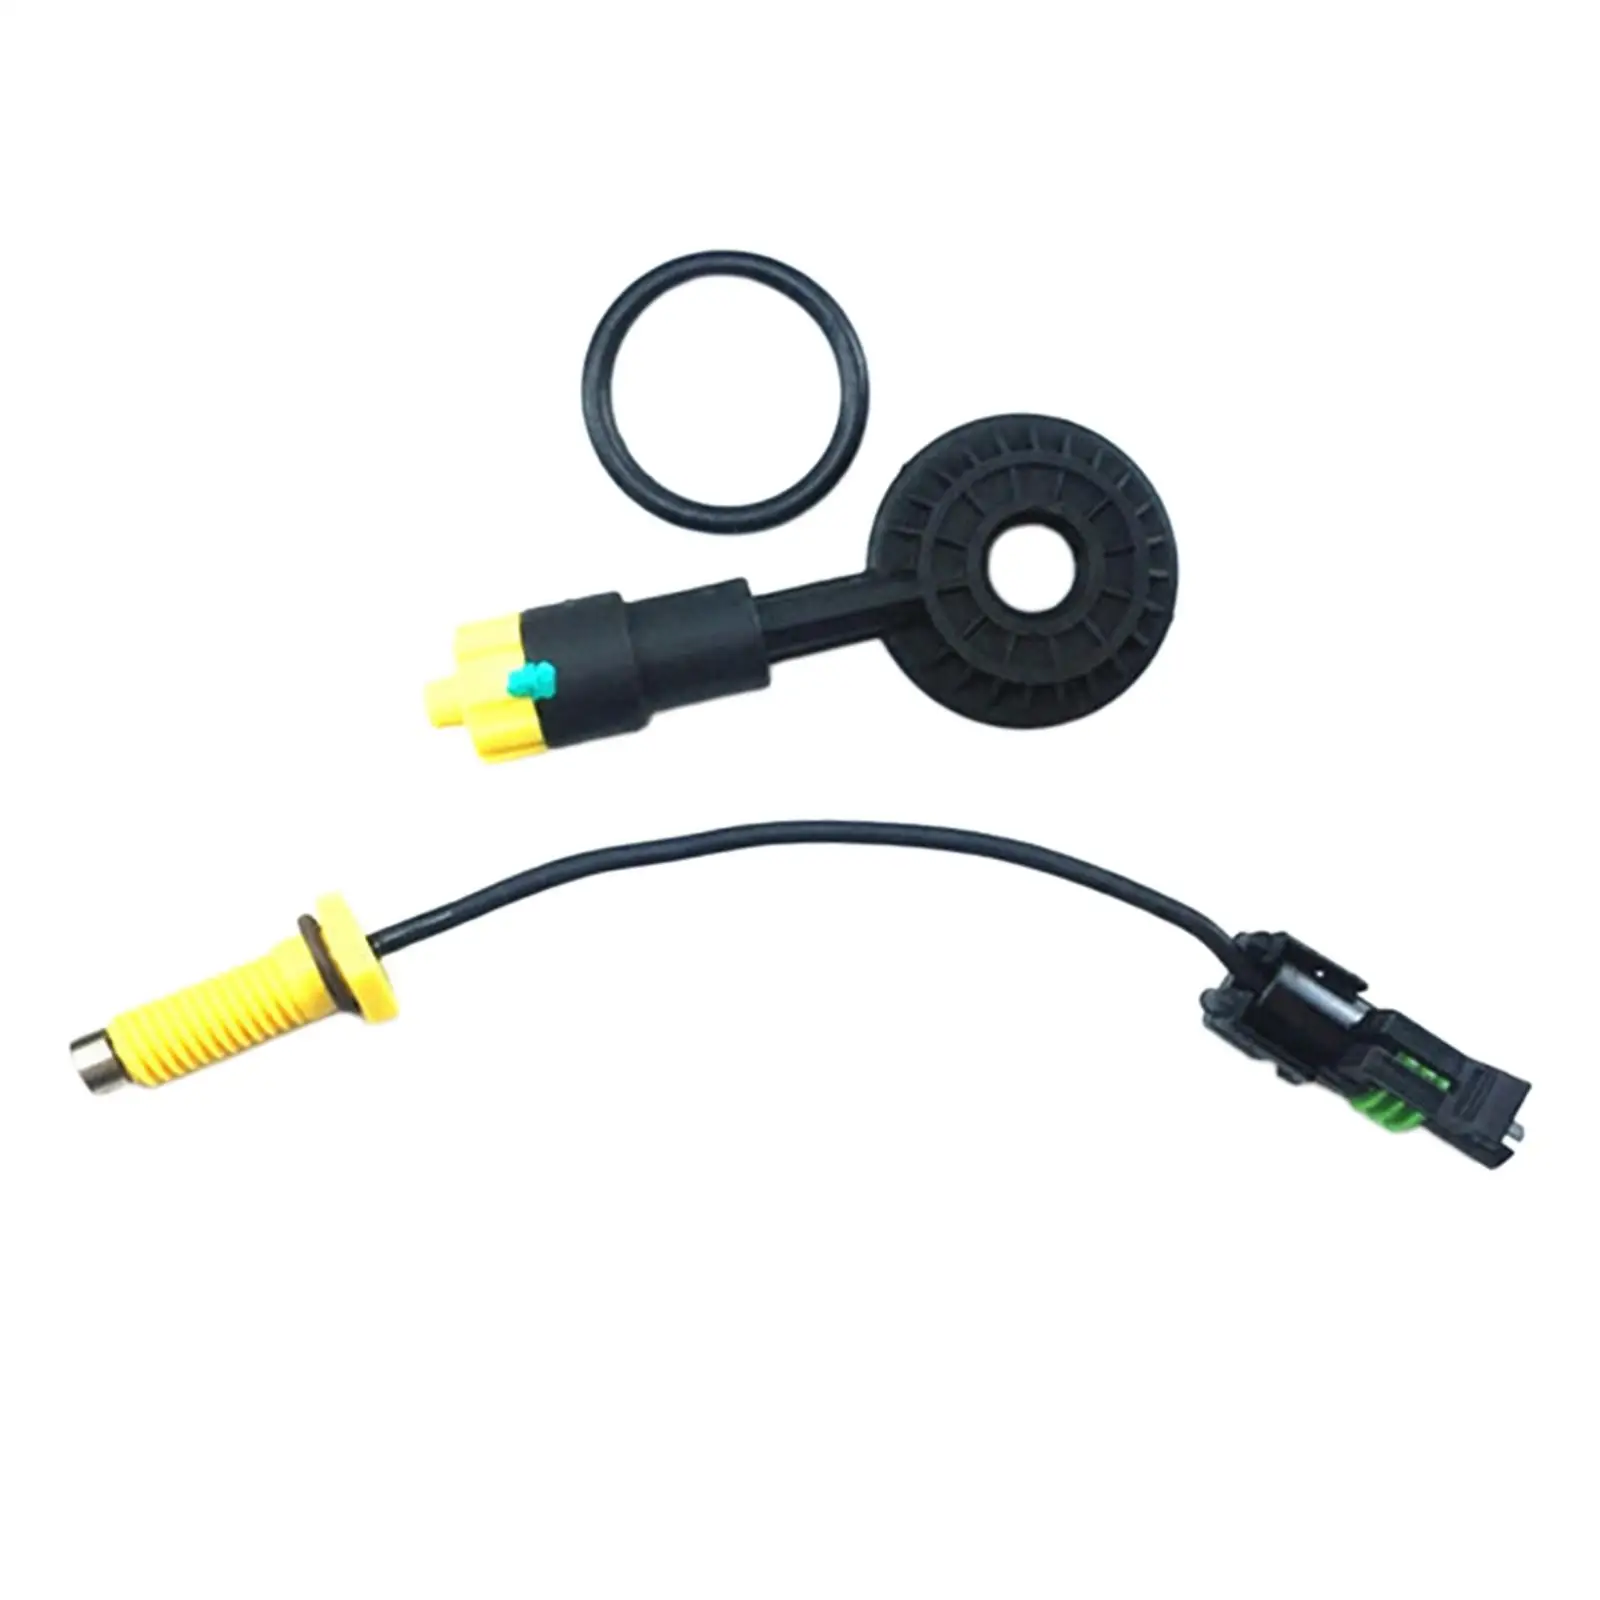 New Fuel Water Sensor for DISCOVERY 3 All Model Years